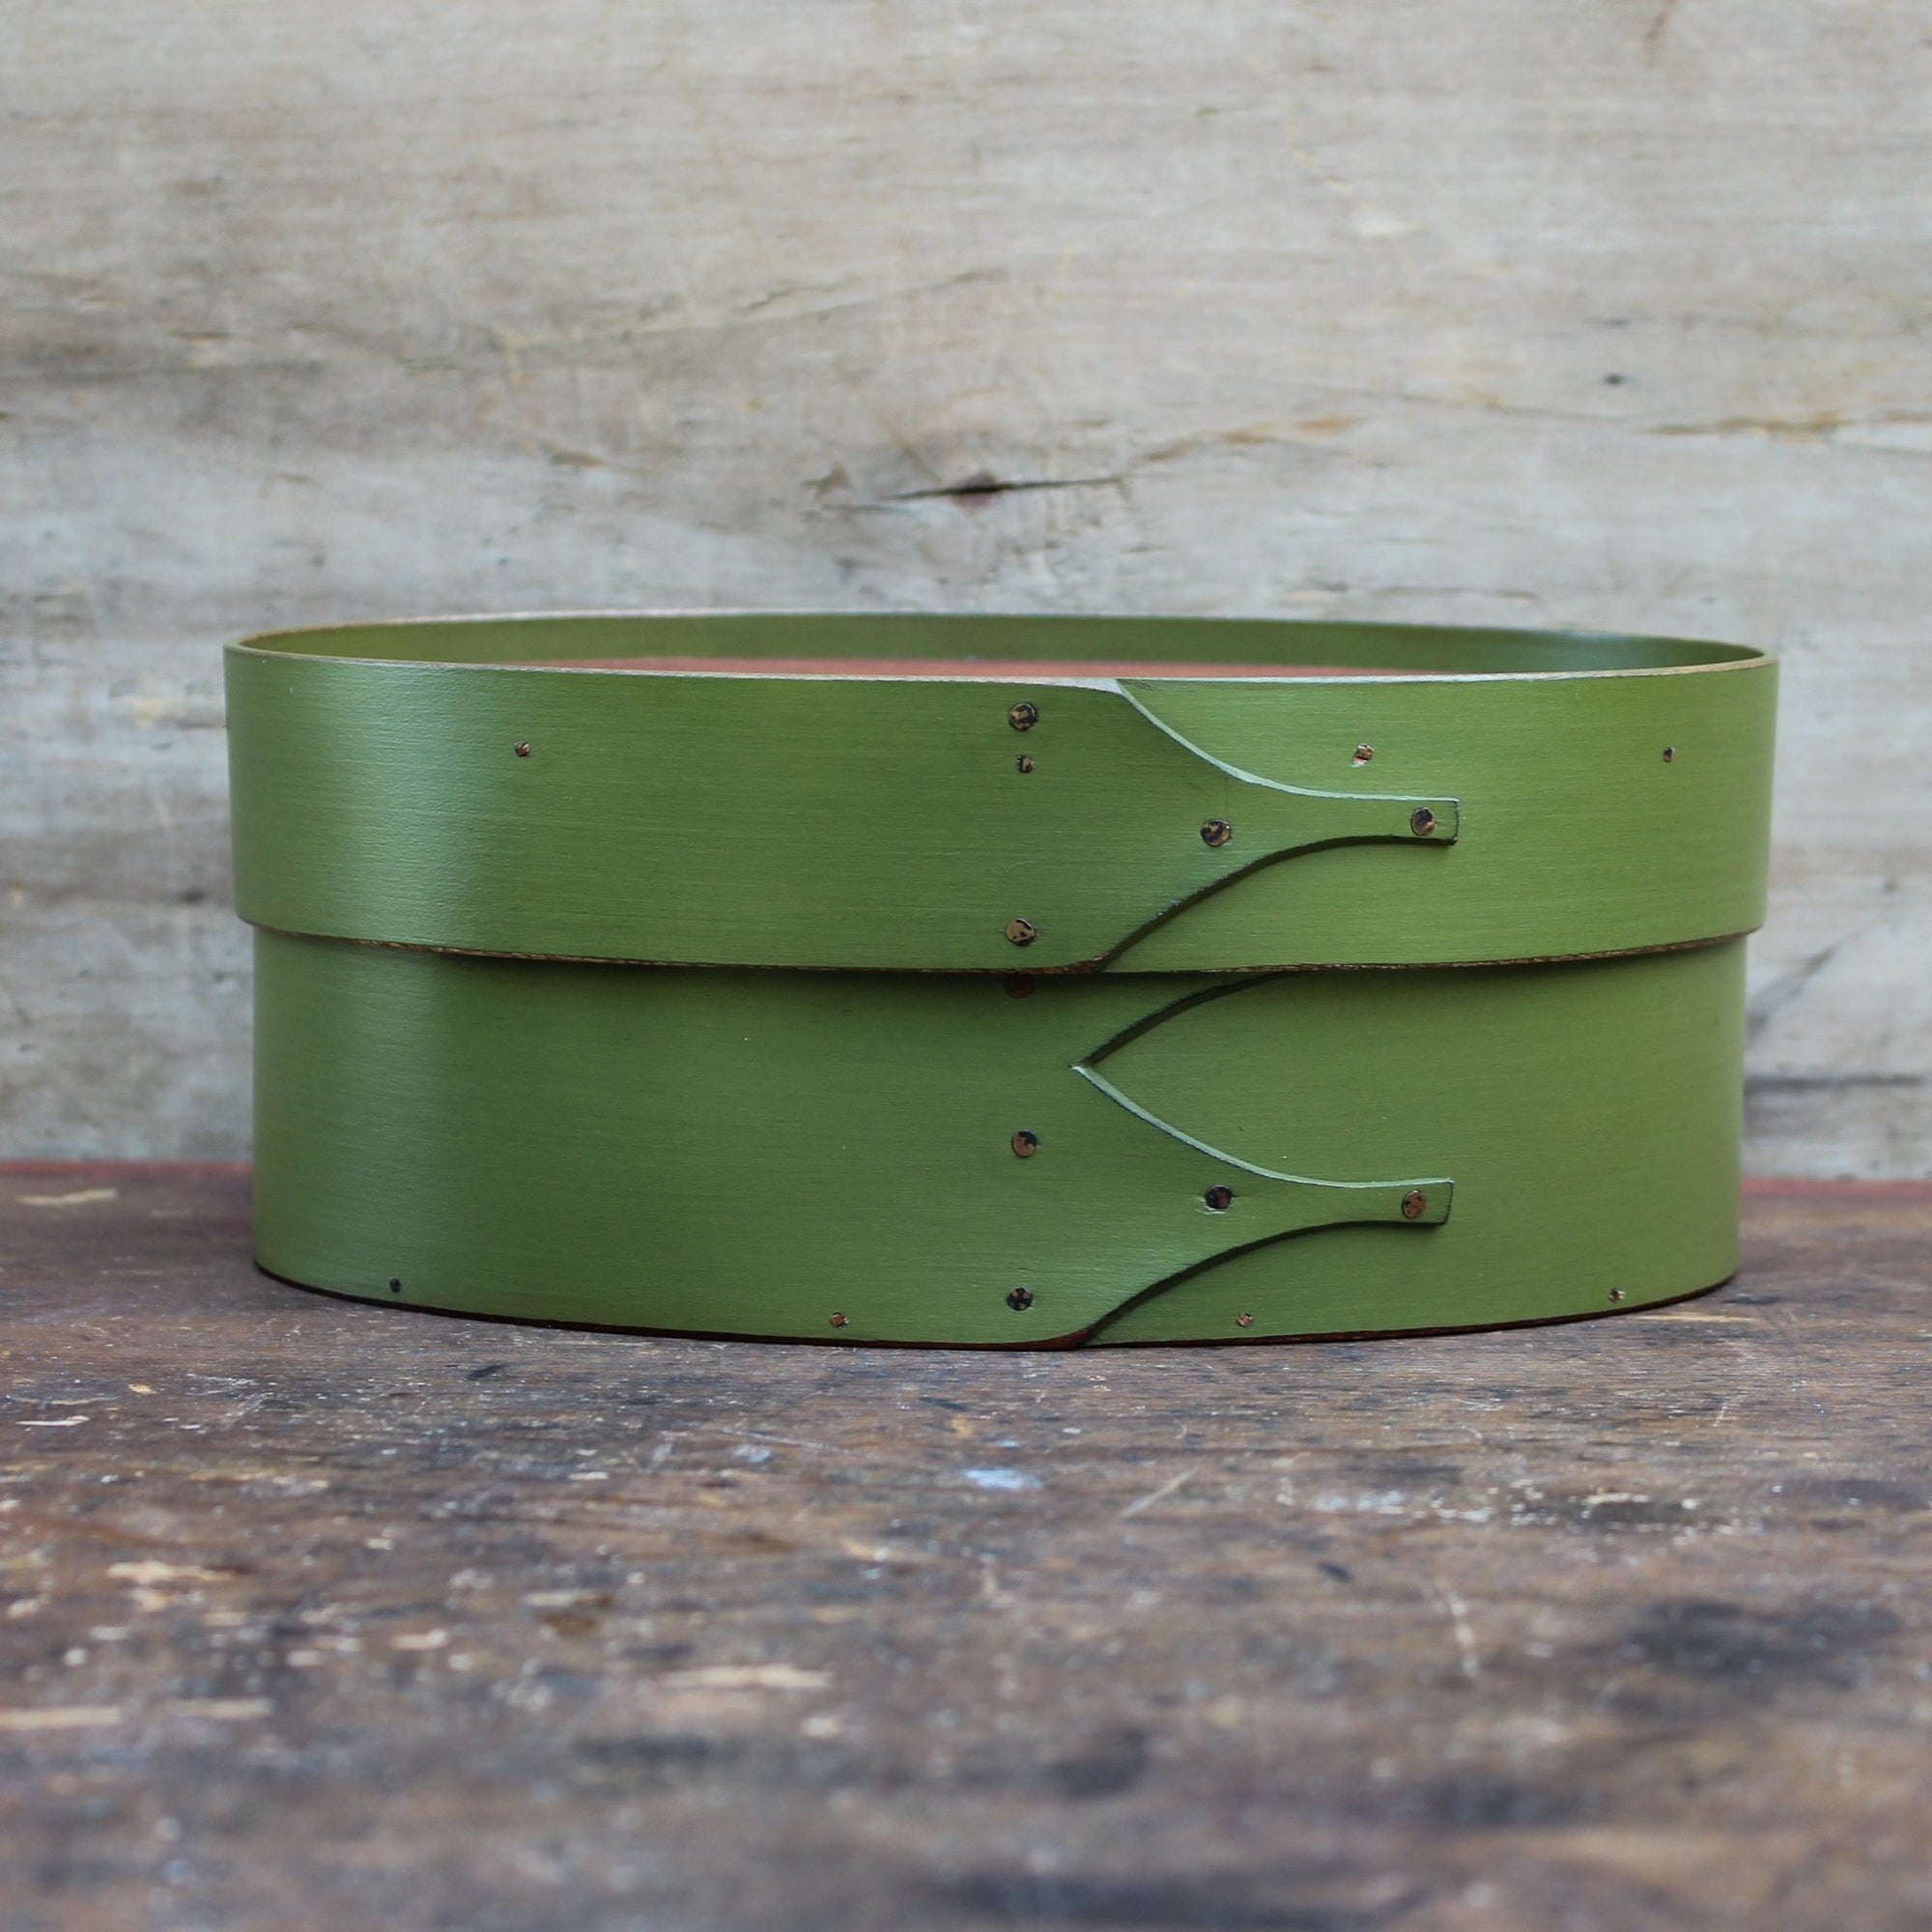 Shaker Oval Box with Recessed Lid for Needlework, Size #3, LeHays Shaker Boxes, Green Milk Paint Finish, Front View